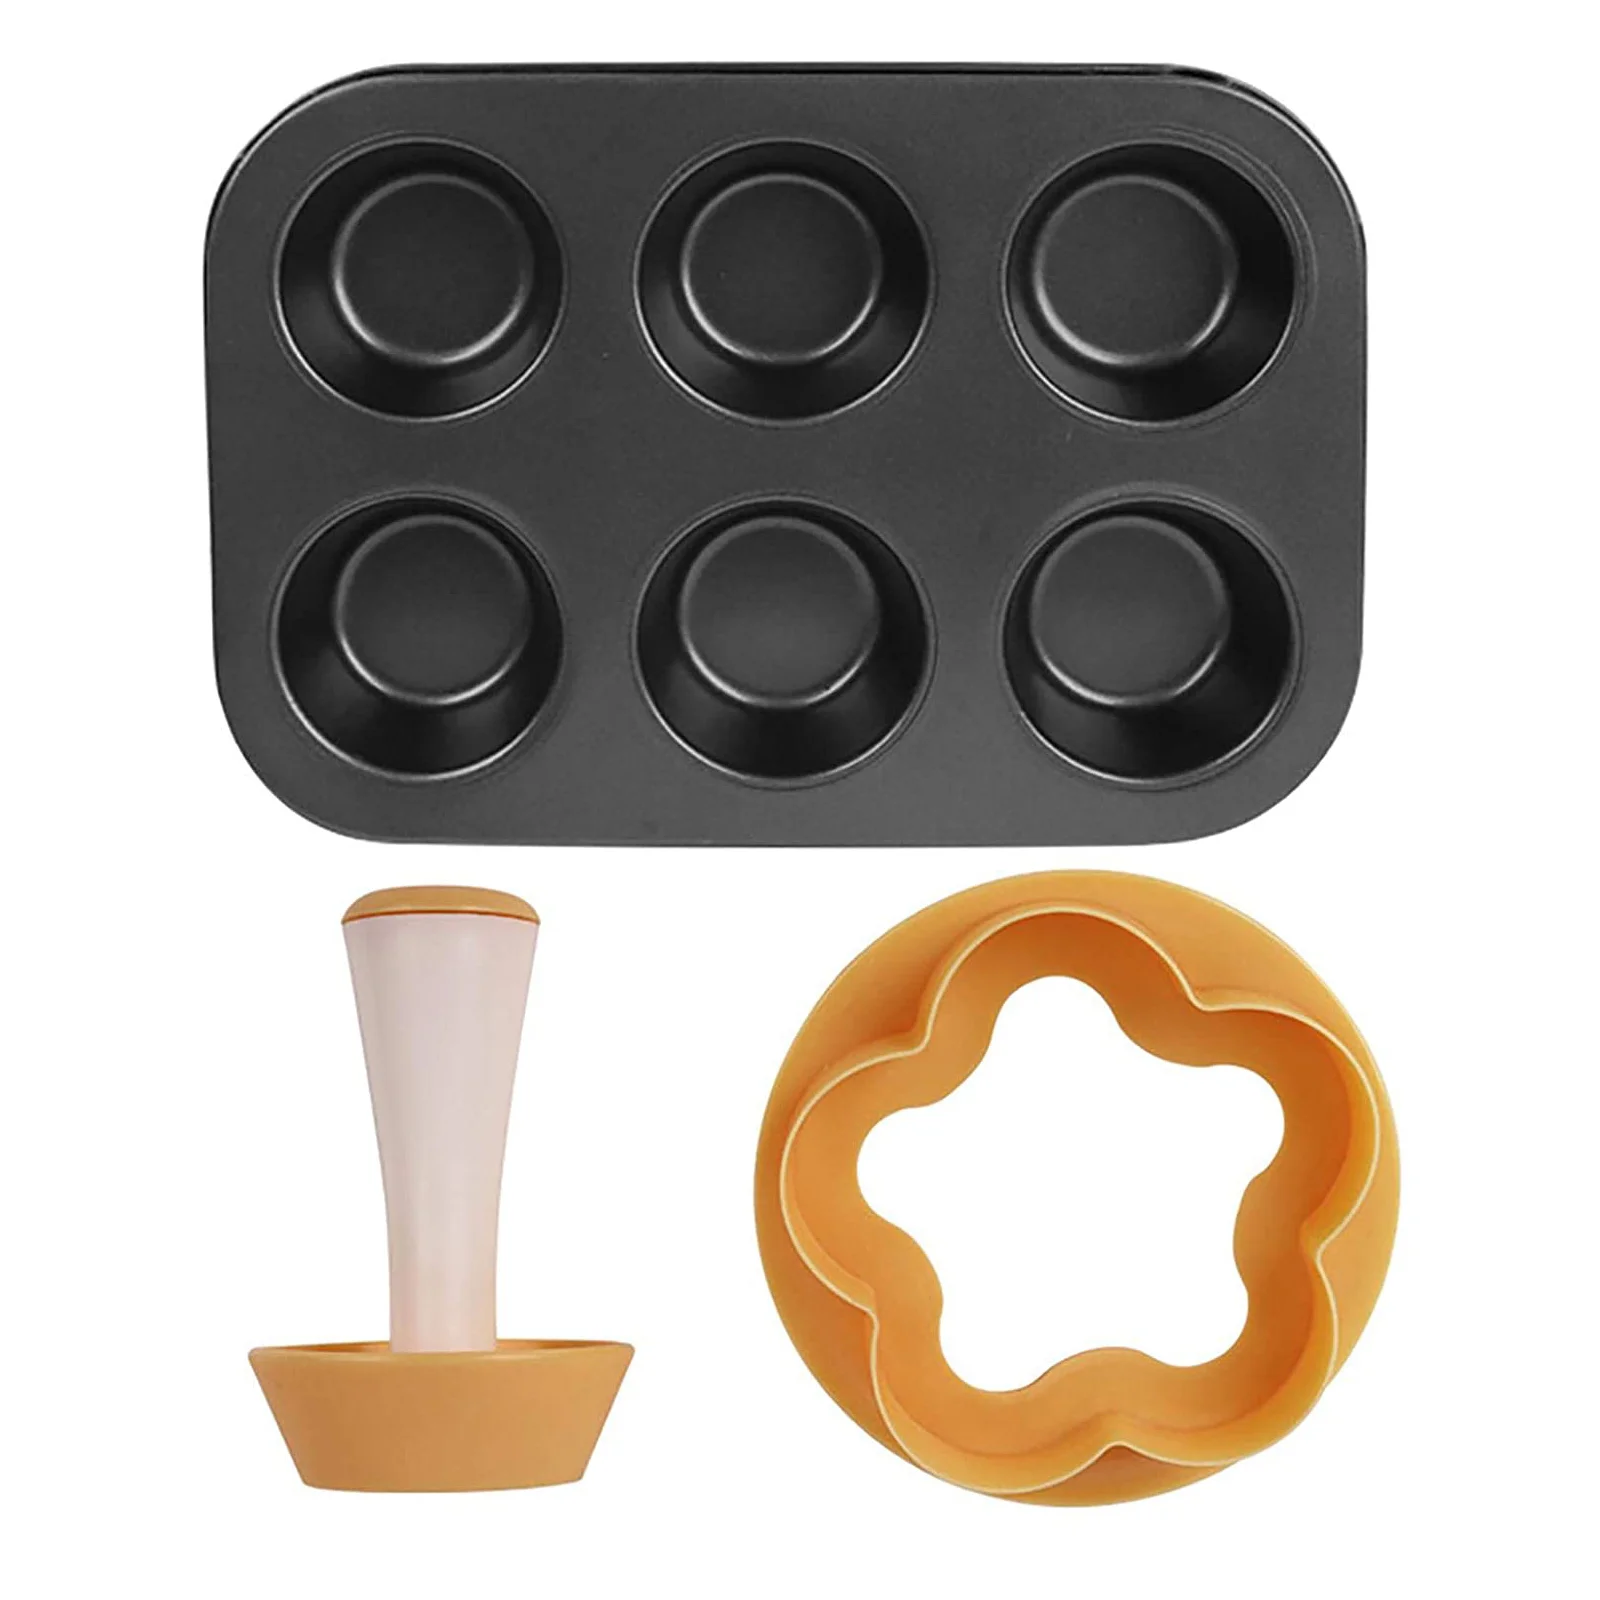 Pastry Dough Tamper Kit Presser Cupcake Muffin Flower Round Mold Diy Baking Kit Cake Cup Press Biscuit Mold For Muffin Donut